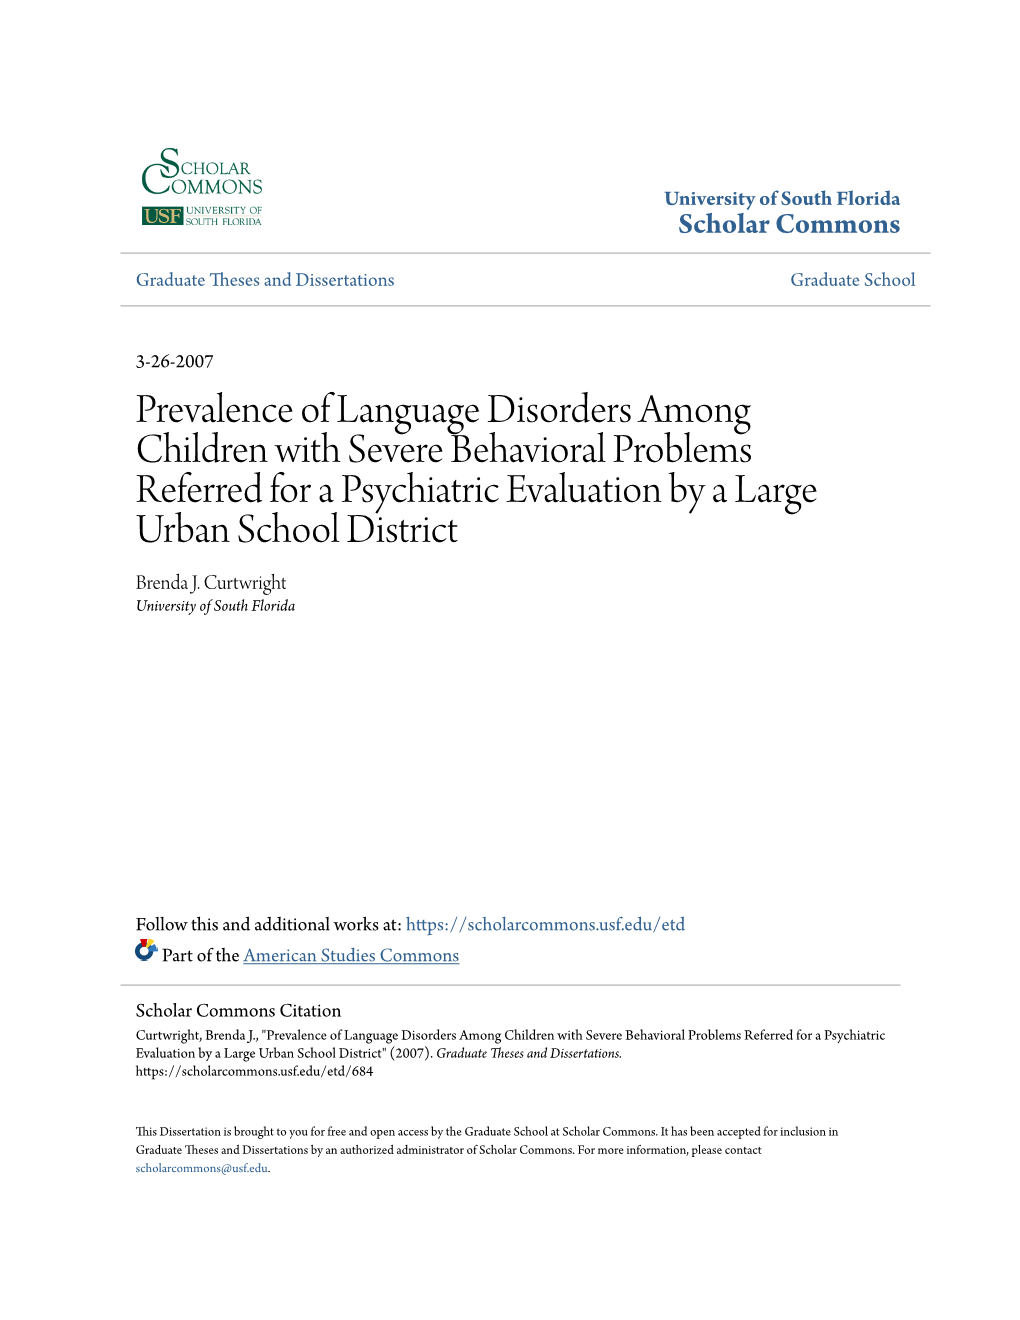 Prevalence of Language Disorders Among Children with Severe Behavioral Problems Referred for a Psychiatric Evaluation by a Large Urban School District Brenda J